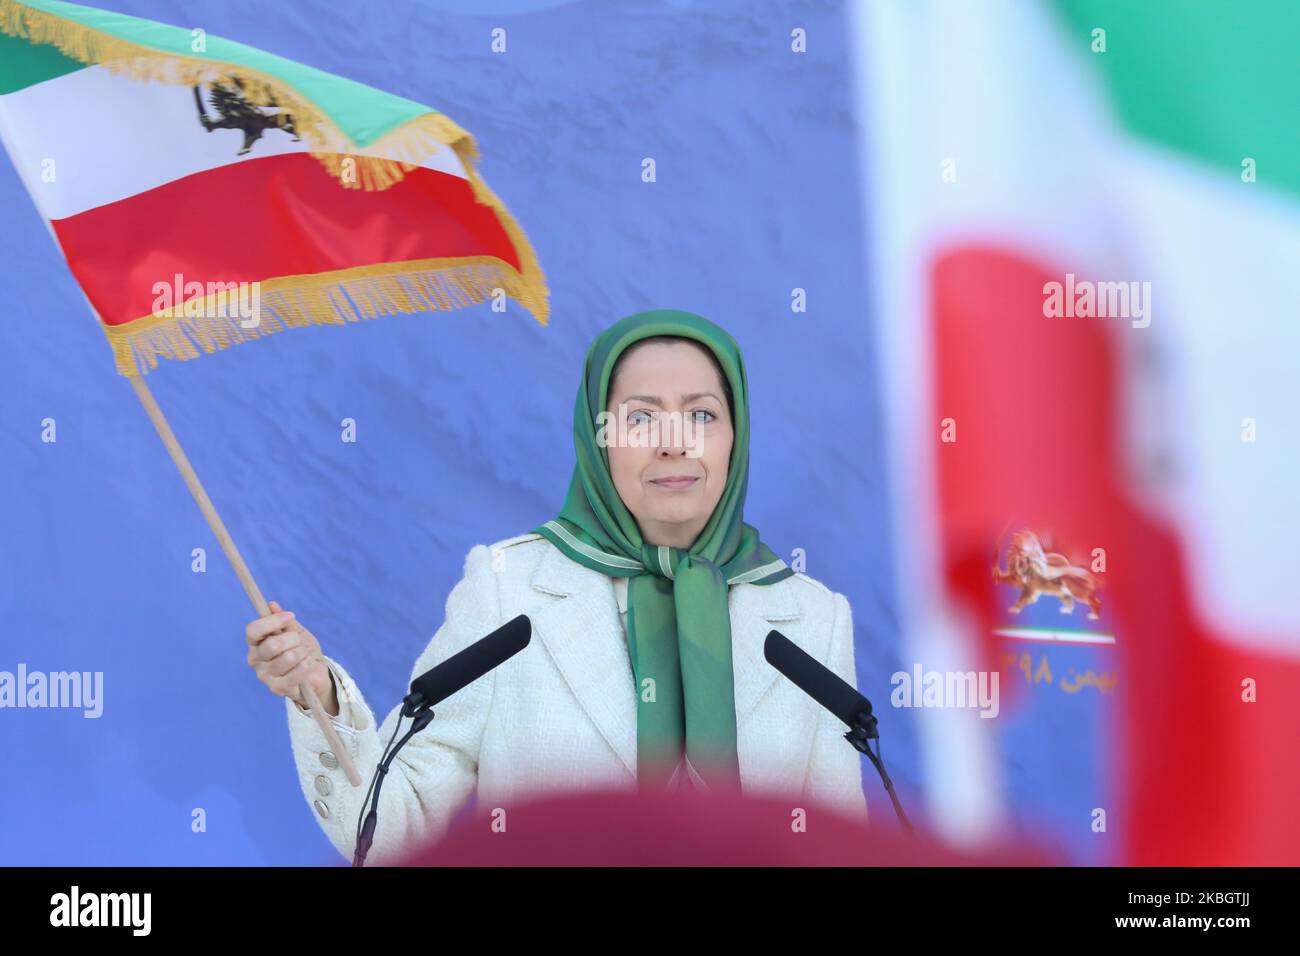 Maryam Rajavi, Ashraf-3, Albania 09/02/2020- Maryam Rajavi, the President-elect of the National Council of Resistance of Iran (NCRI) attend the ceremony of the members of the People Mojahedin Organization of Iran (PMOI/MEK) at Ashraf-3 in Albania on Sunday, February 9, 2020, marking the anniversary of the 1979 anti-monarchic revolution in Iran. Maryam Rajavi said the Nov. 2019 and Jan. 2020 uprisings confirmed the Iranian people readiness to overthrow the ruling theocracy and move toward a democratic Iran. (Photo by Siavosh Hosseini/NurPhoto) Stock Photo